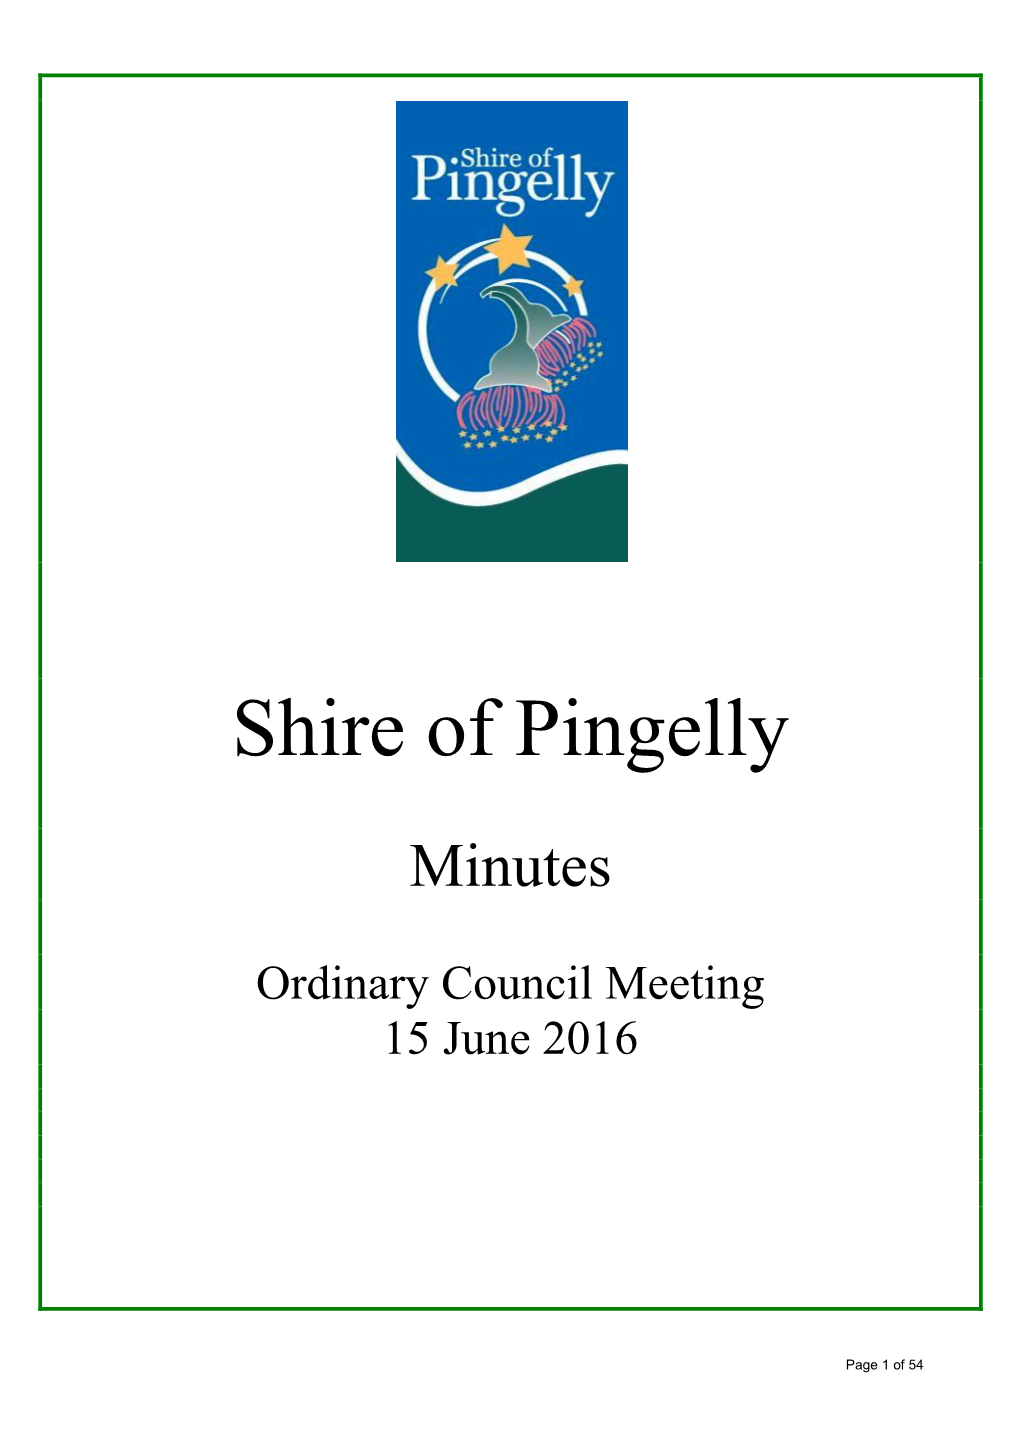 15 June 2016 Minutes from Ordinary Council Meeting